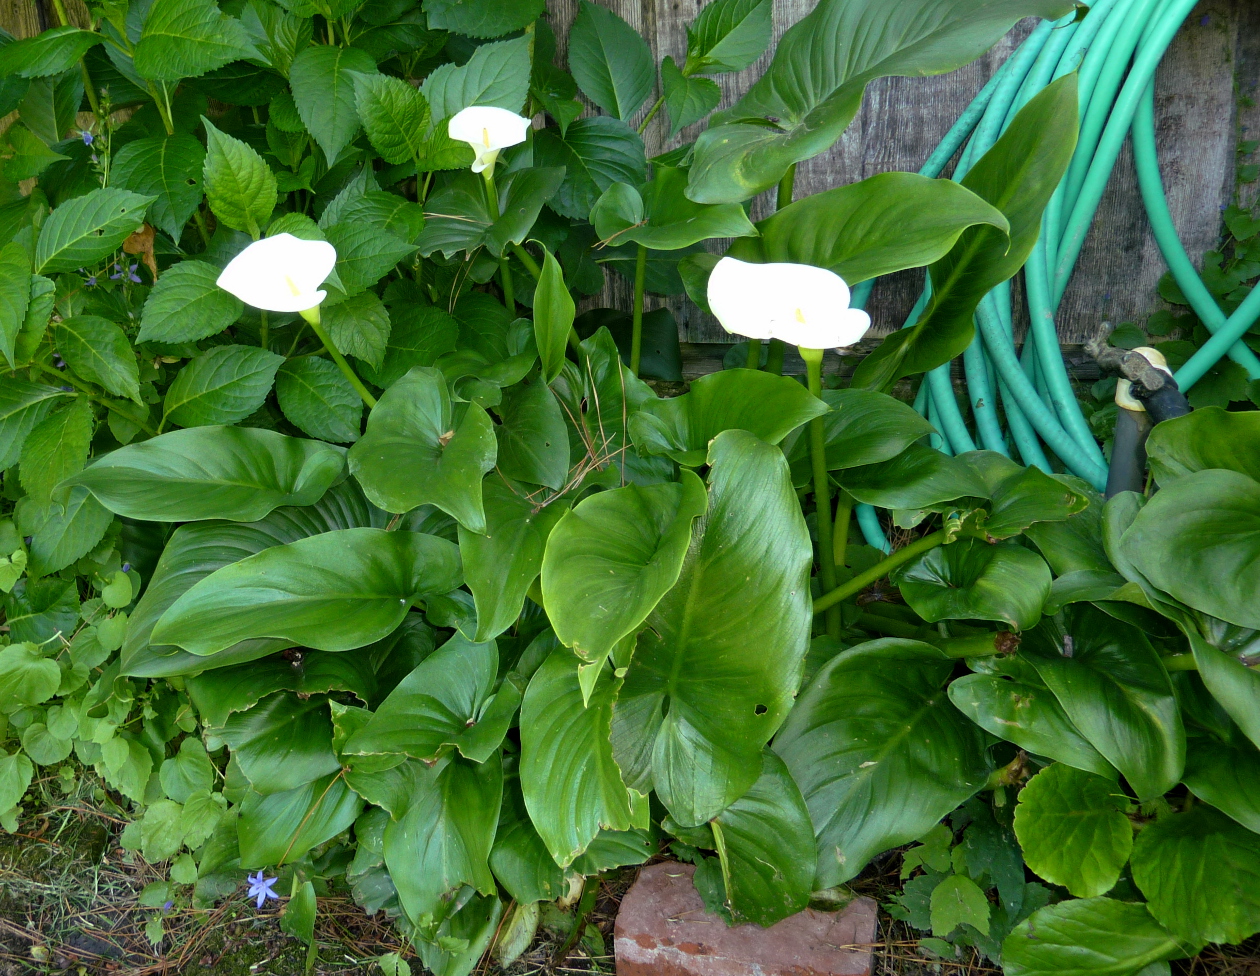 How to care of calla lily plants in arizona